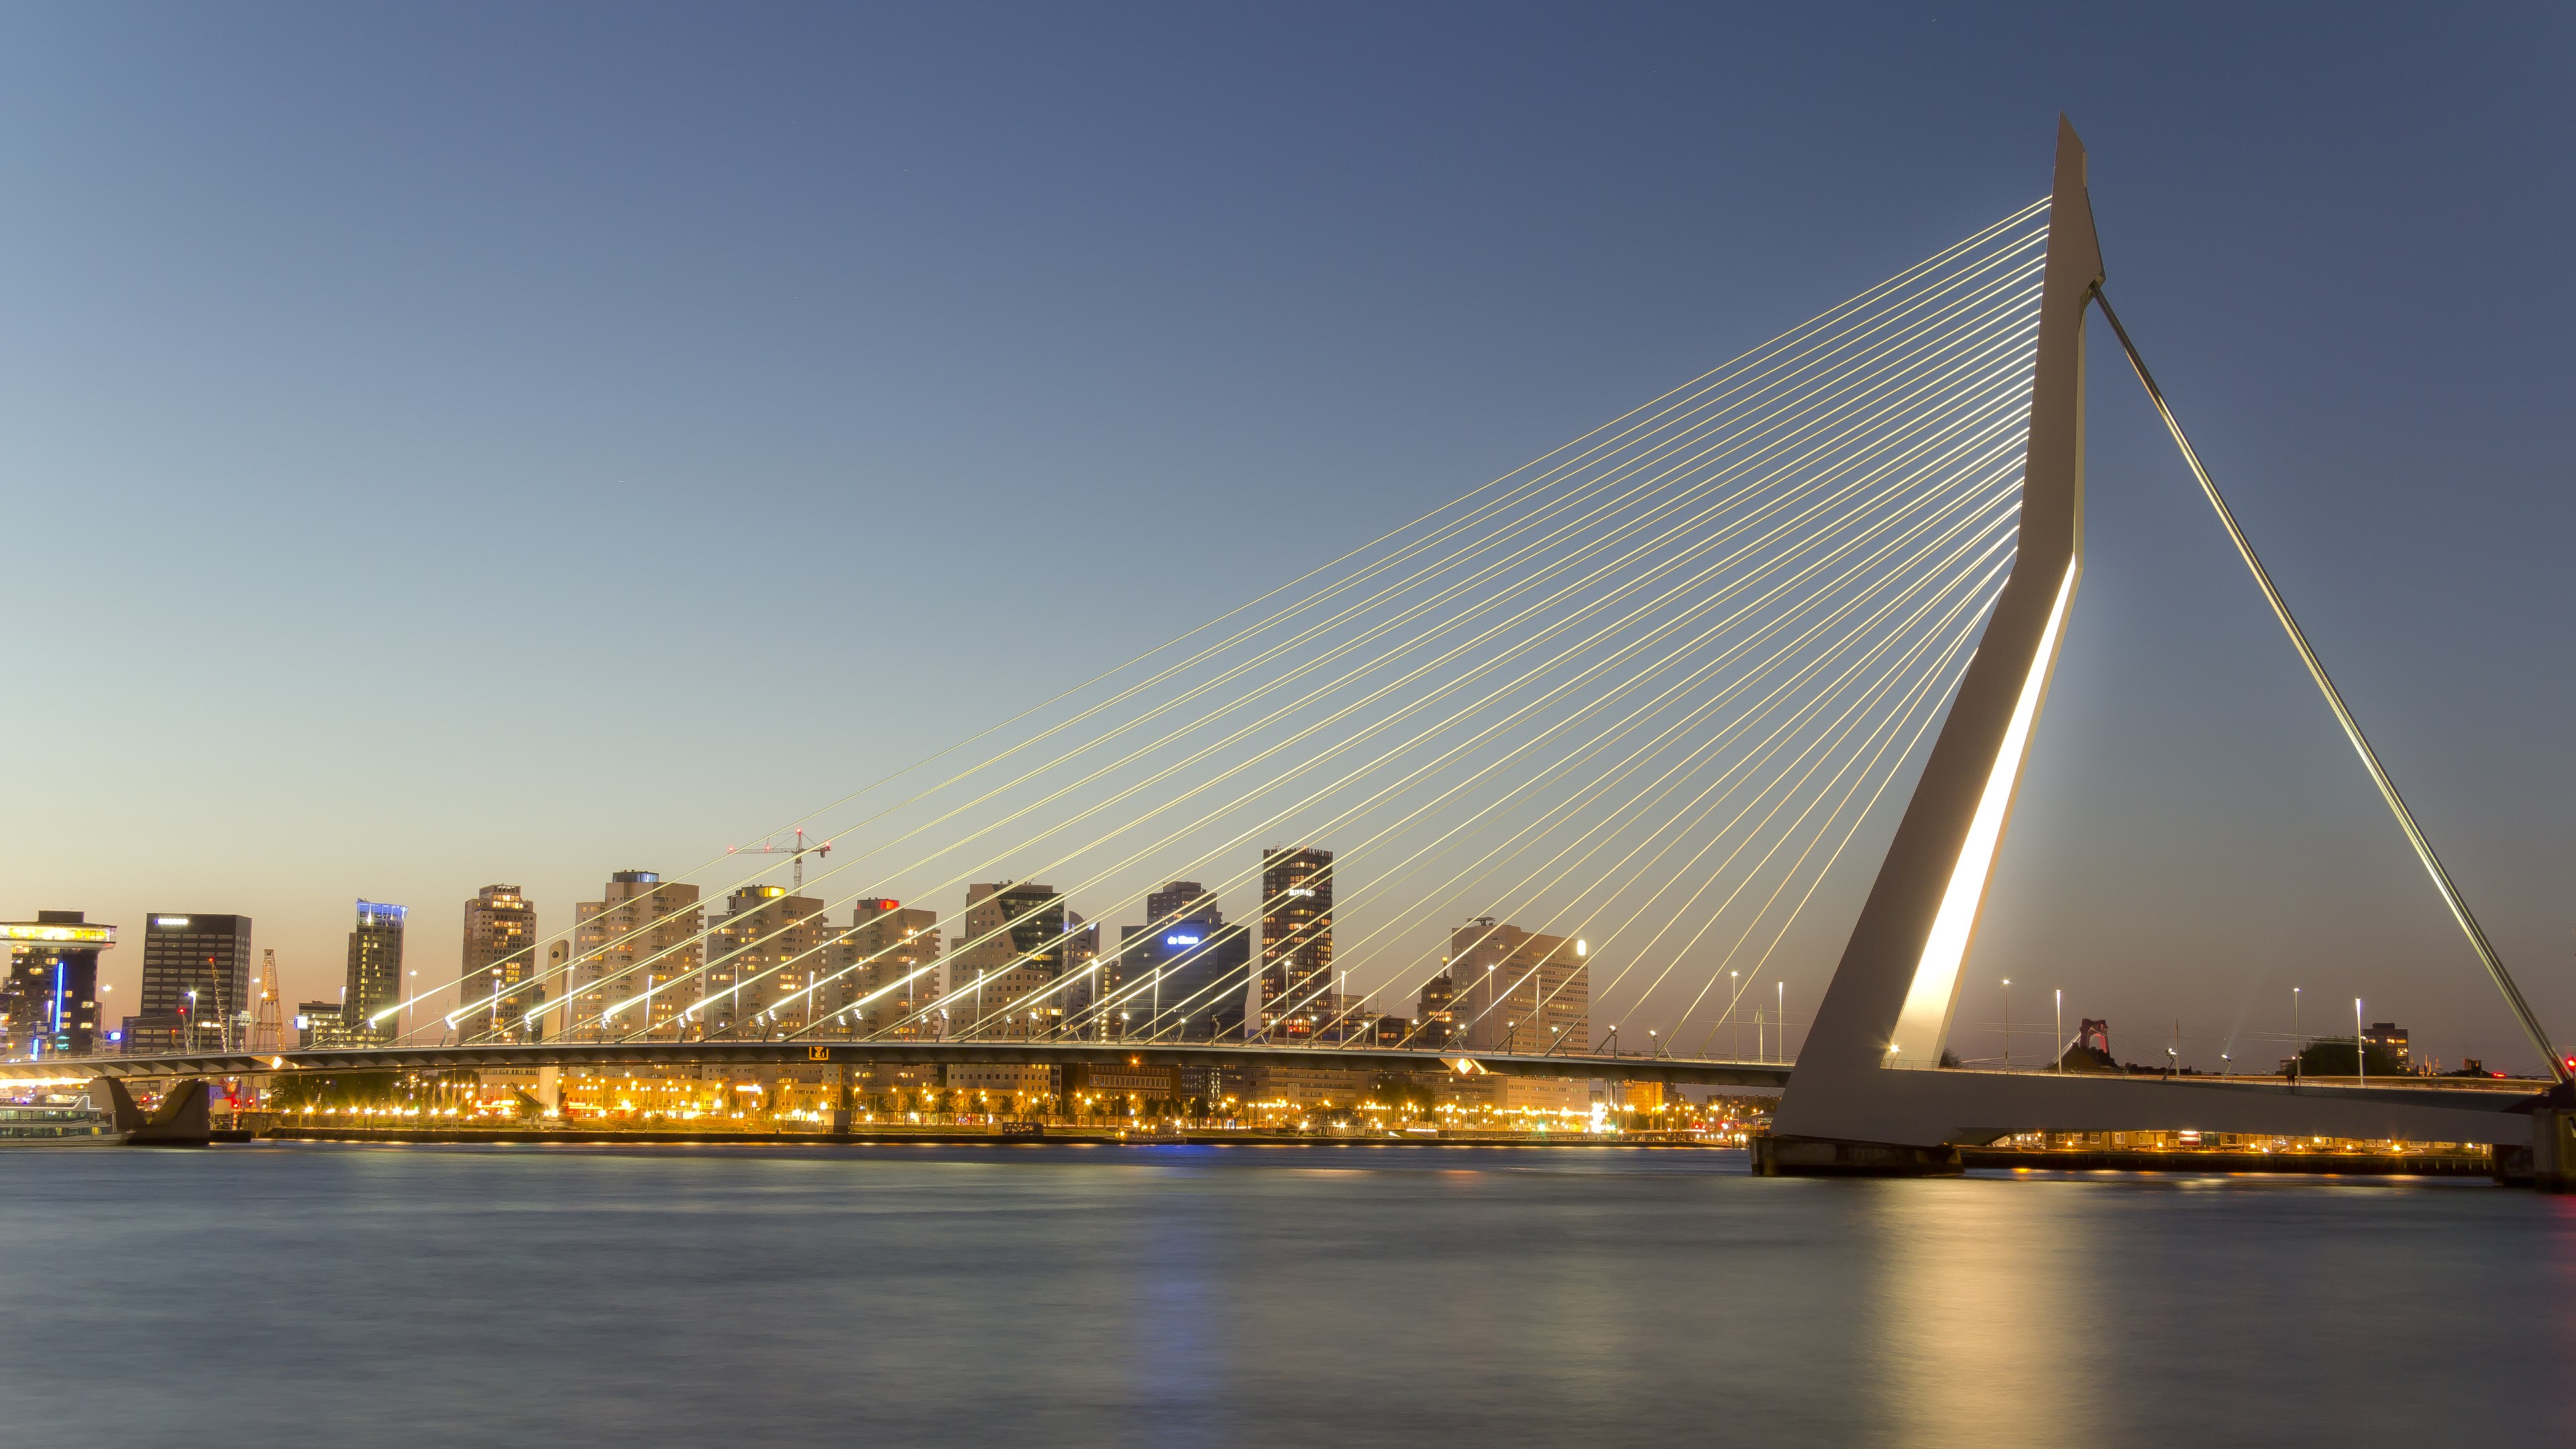 The Erasmus Bridge In Rotterdam, Netherlands with the City Lights in the Background by Luke Price